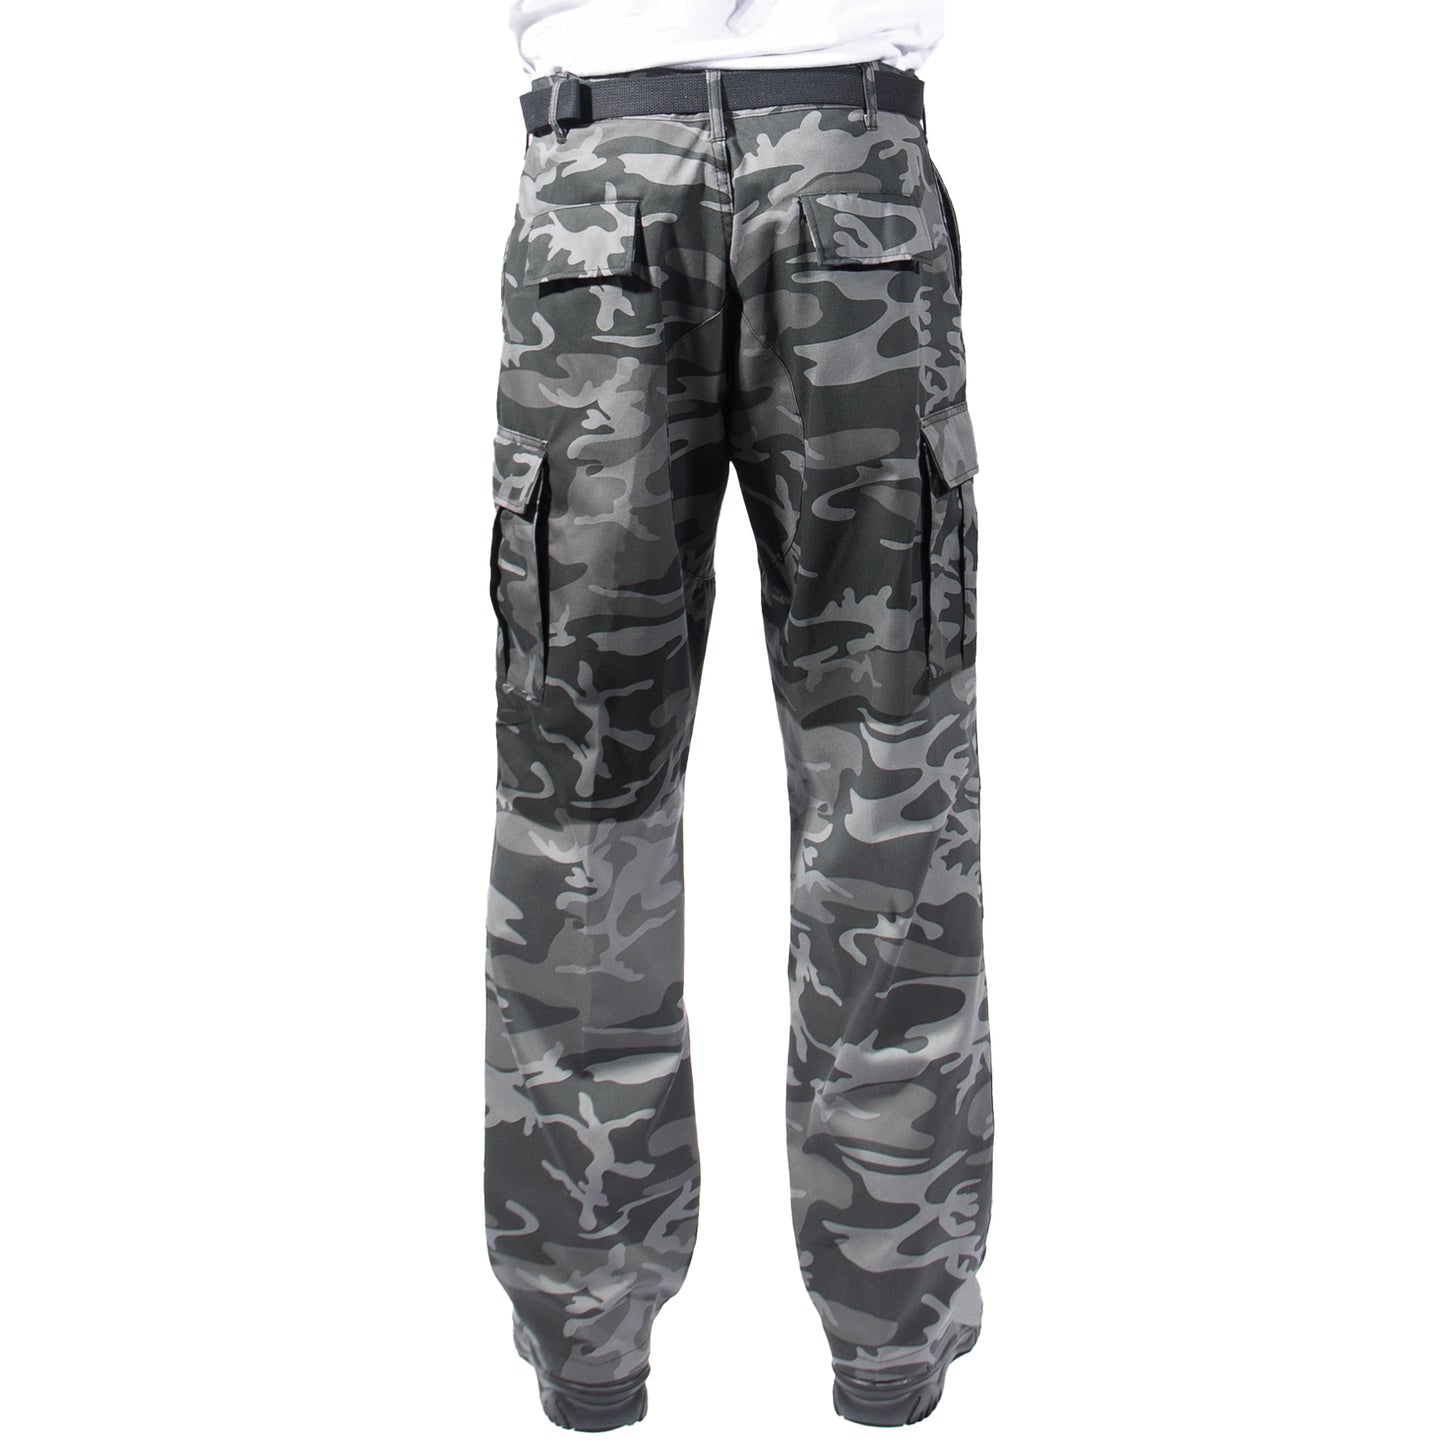 Rothco Relaxed Fit Zipper Fly BDU Pants - Black Camo